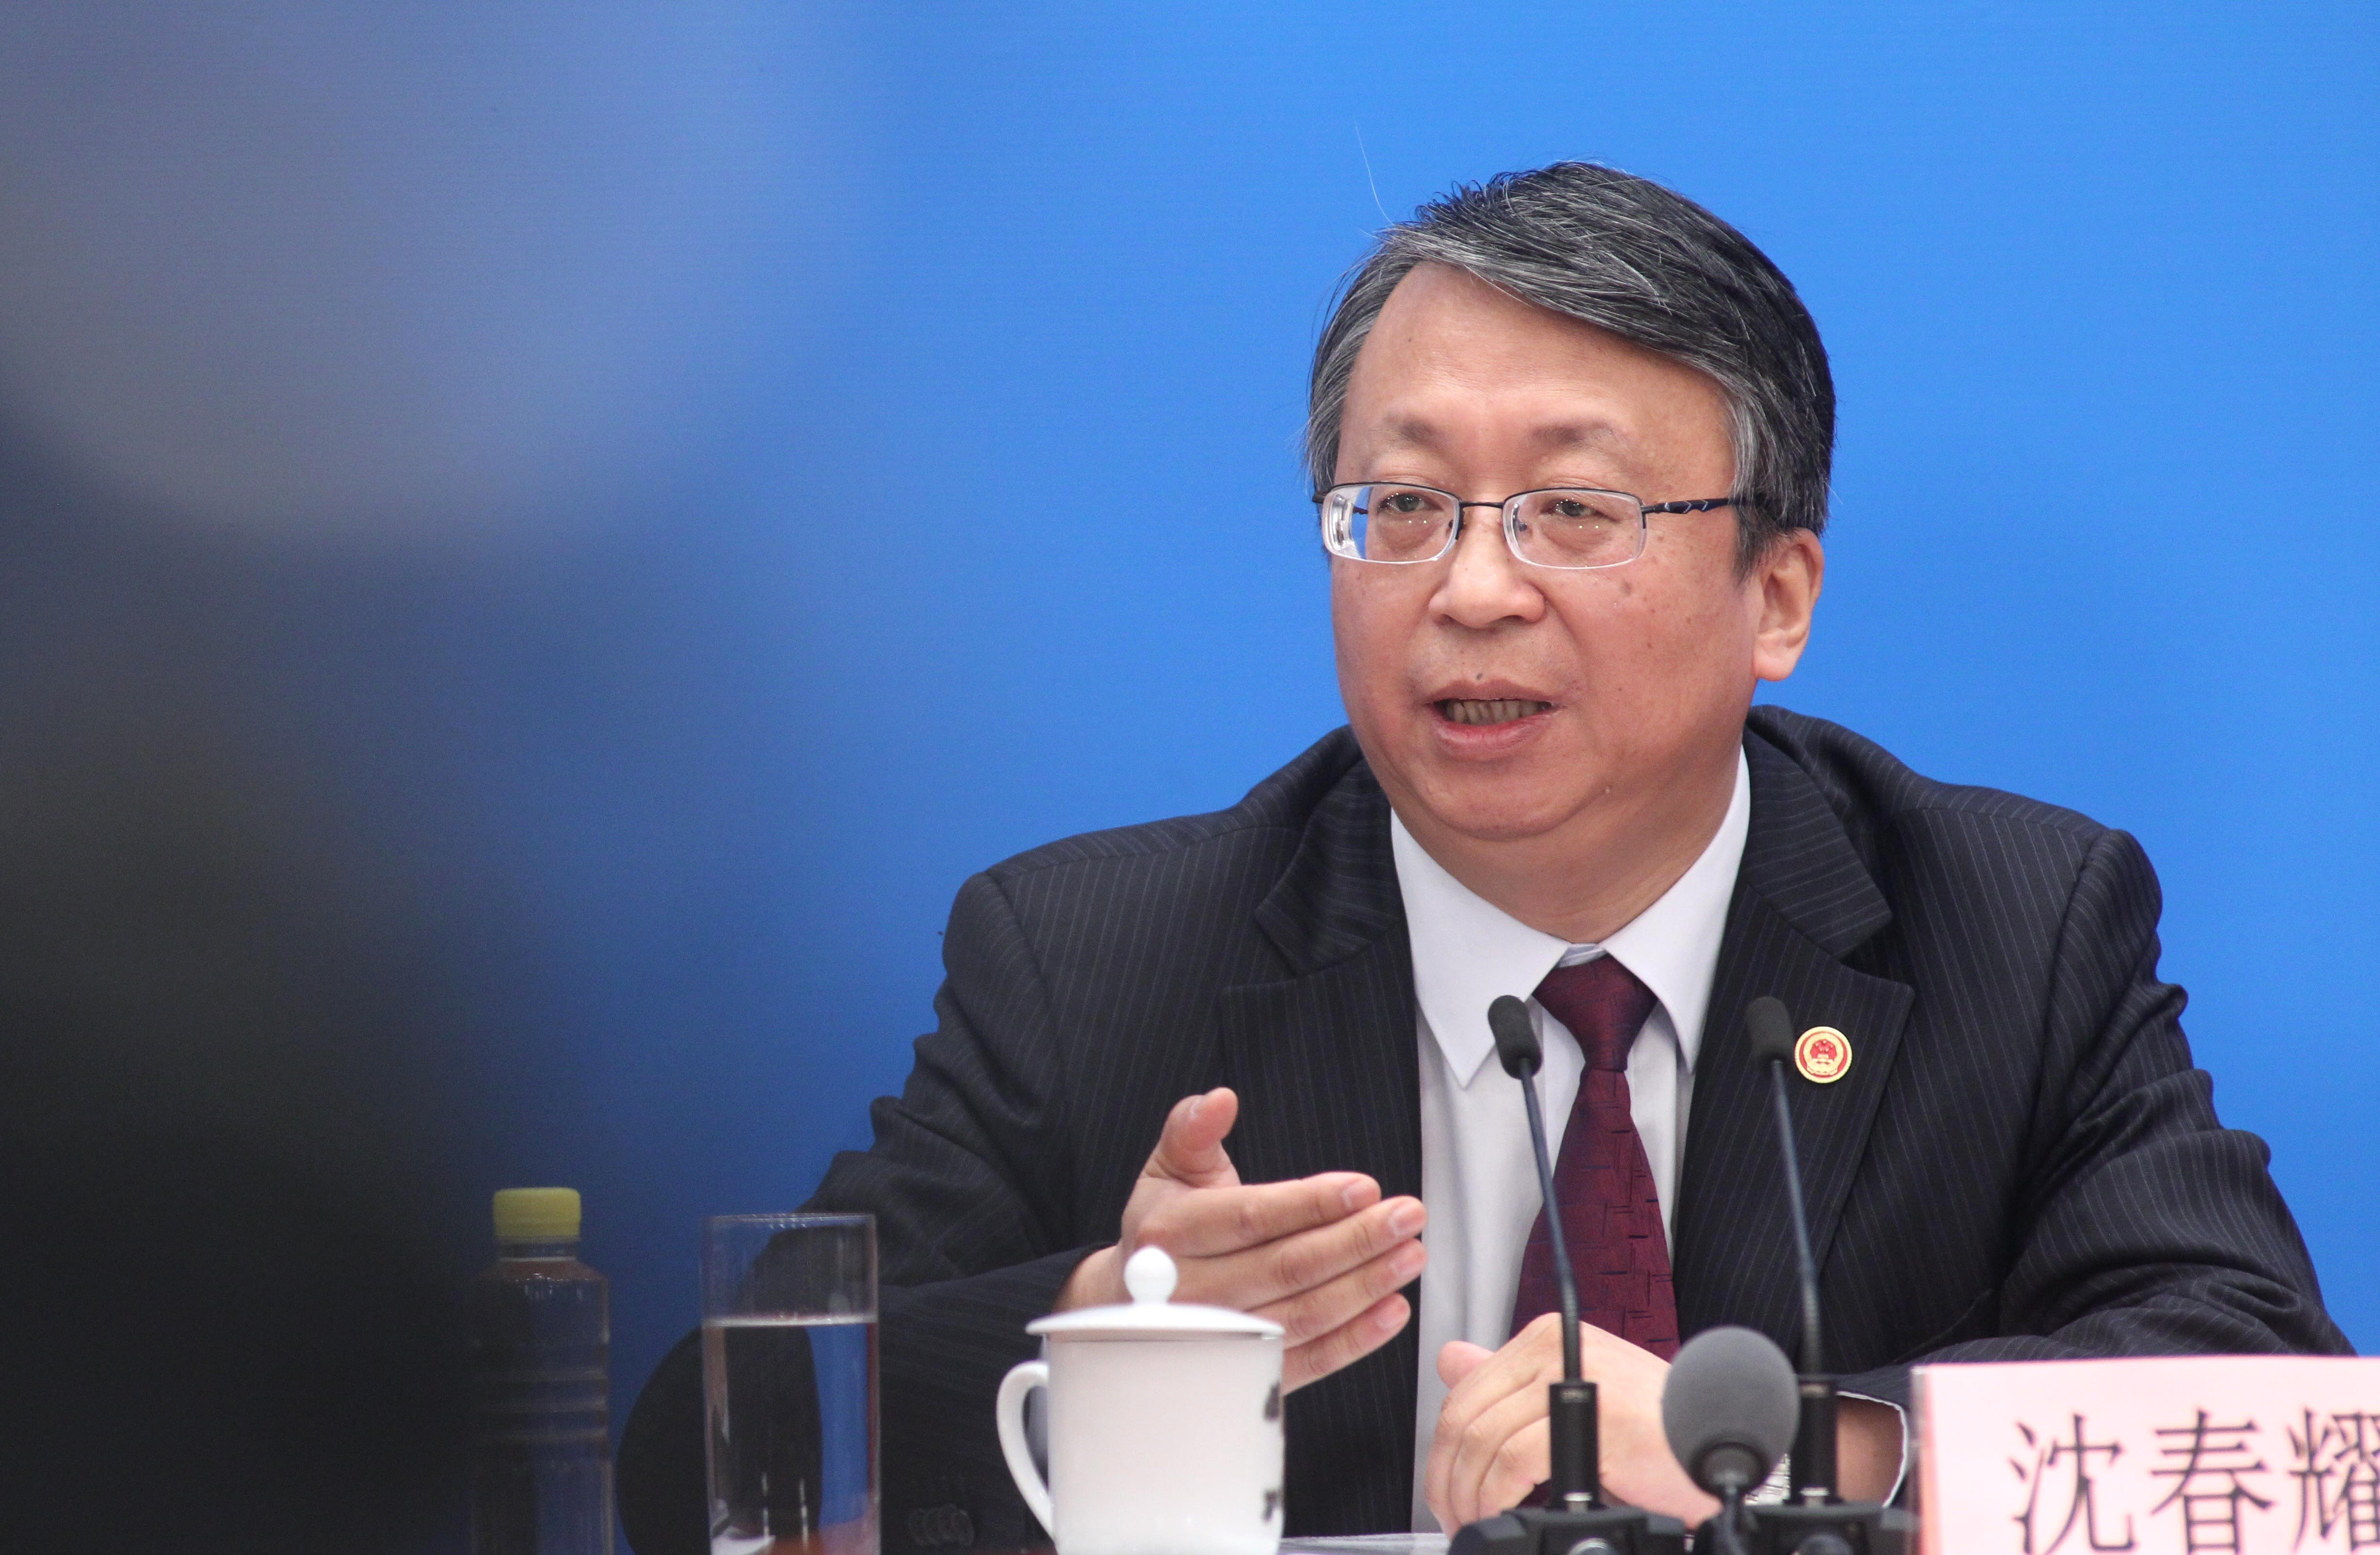 Shen Chunyao is the new head of the Basic Law committees in Hong Kong and Macau. Photo: Simon Song